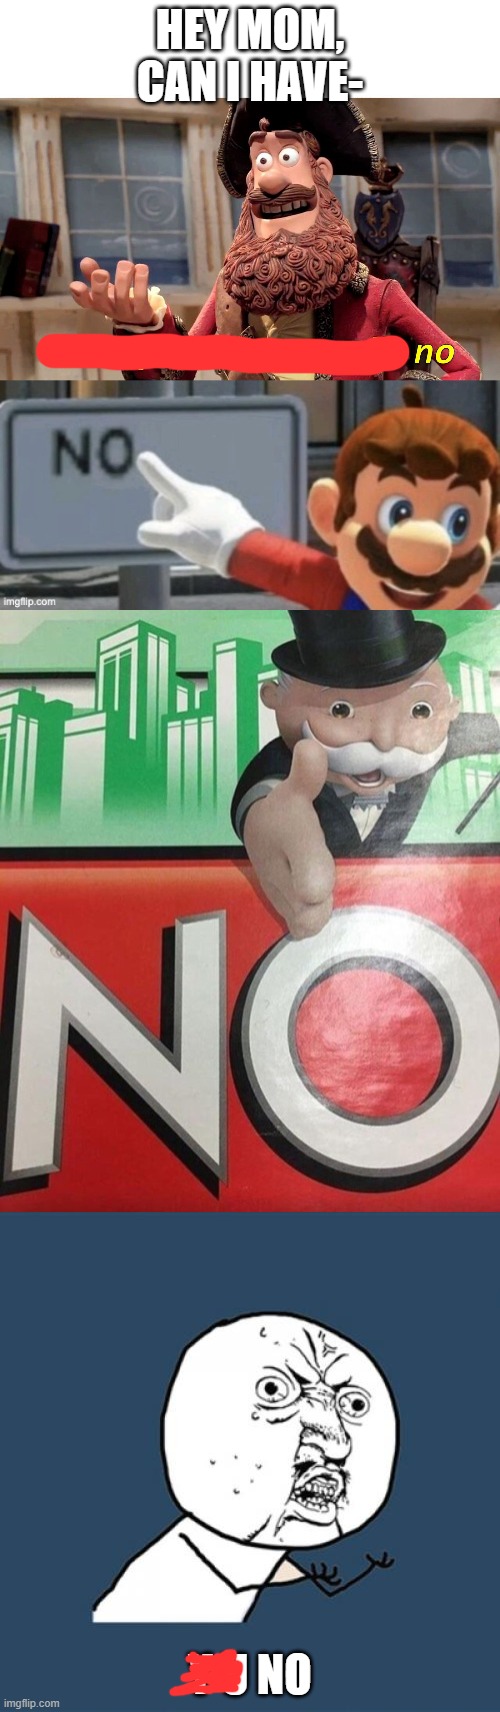 HEY MOM, CAN I HAVE-; Y U NO | image tagged in memes,y u no,monopoly no,well yes but actually no,mario no sign | made w/ Imgflip meme maker